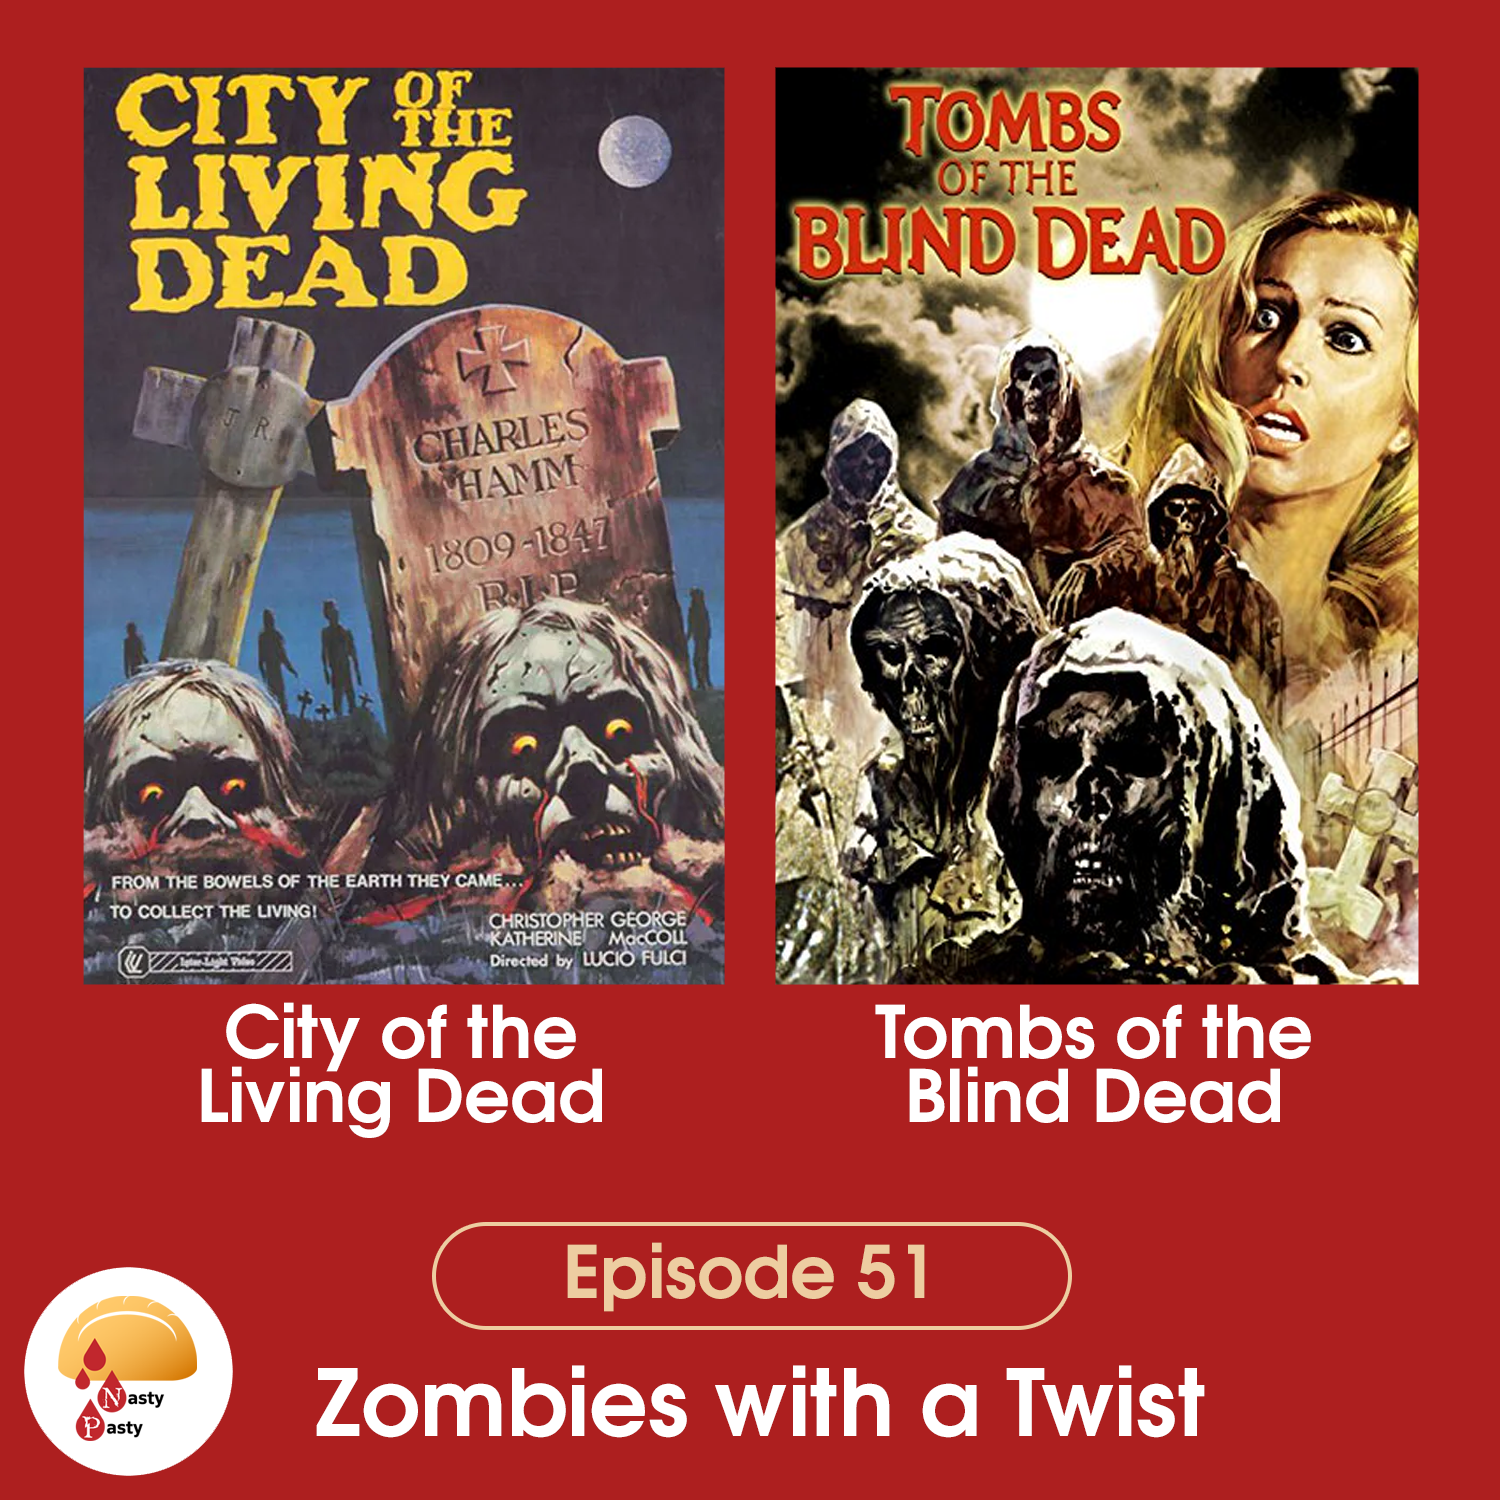 Episode 51: Zombies with a Twist